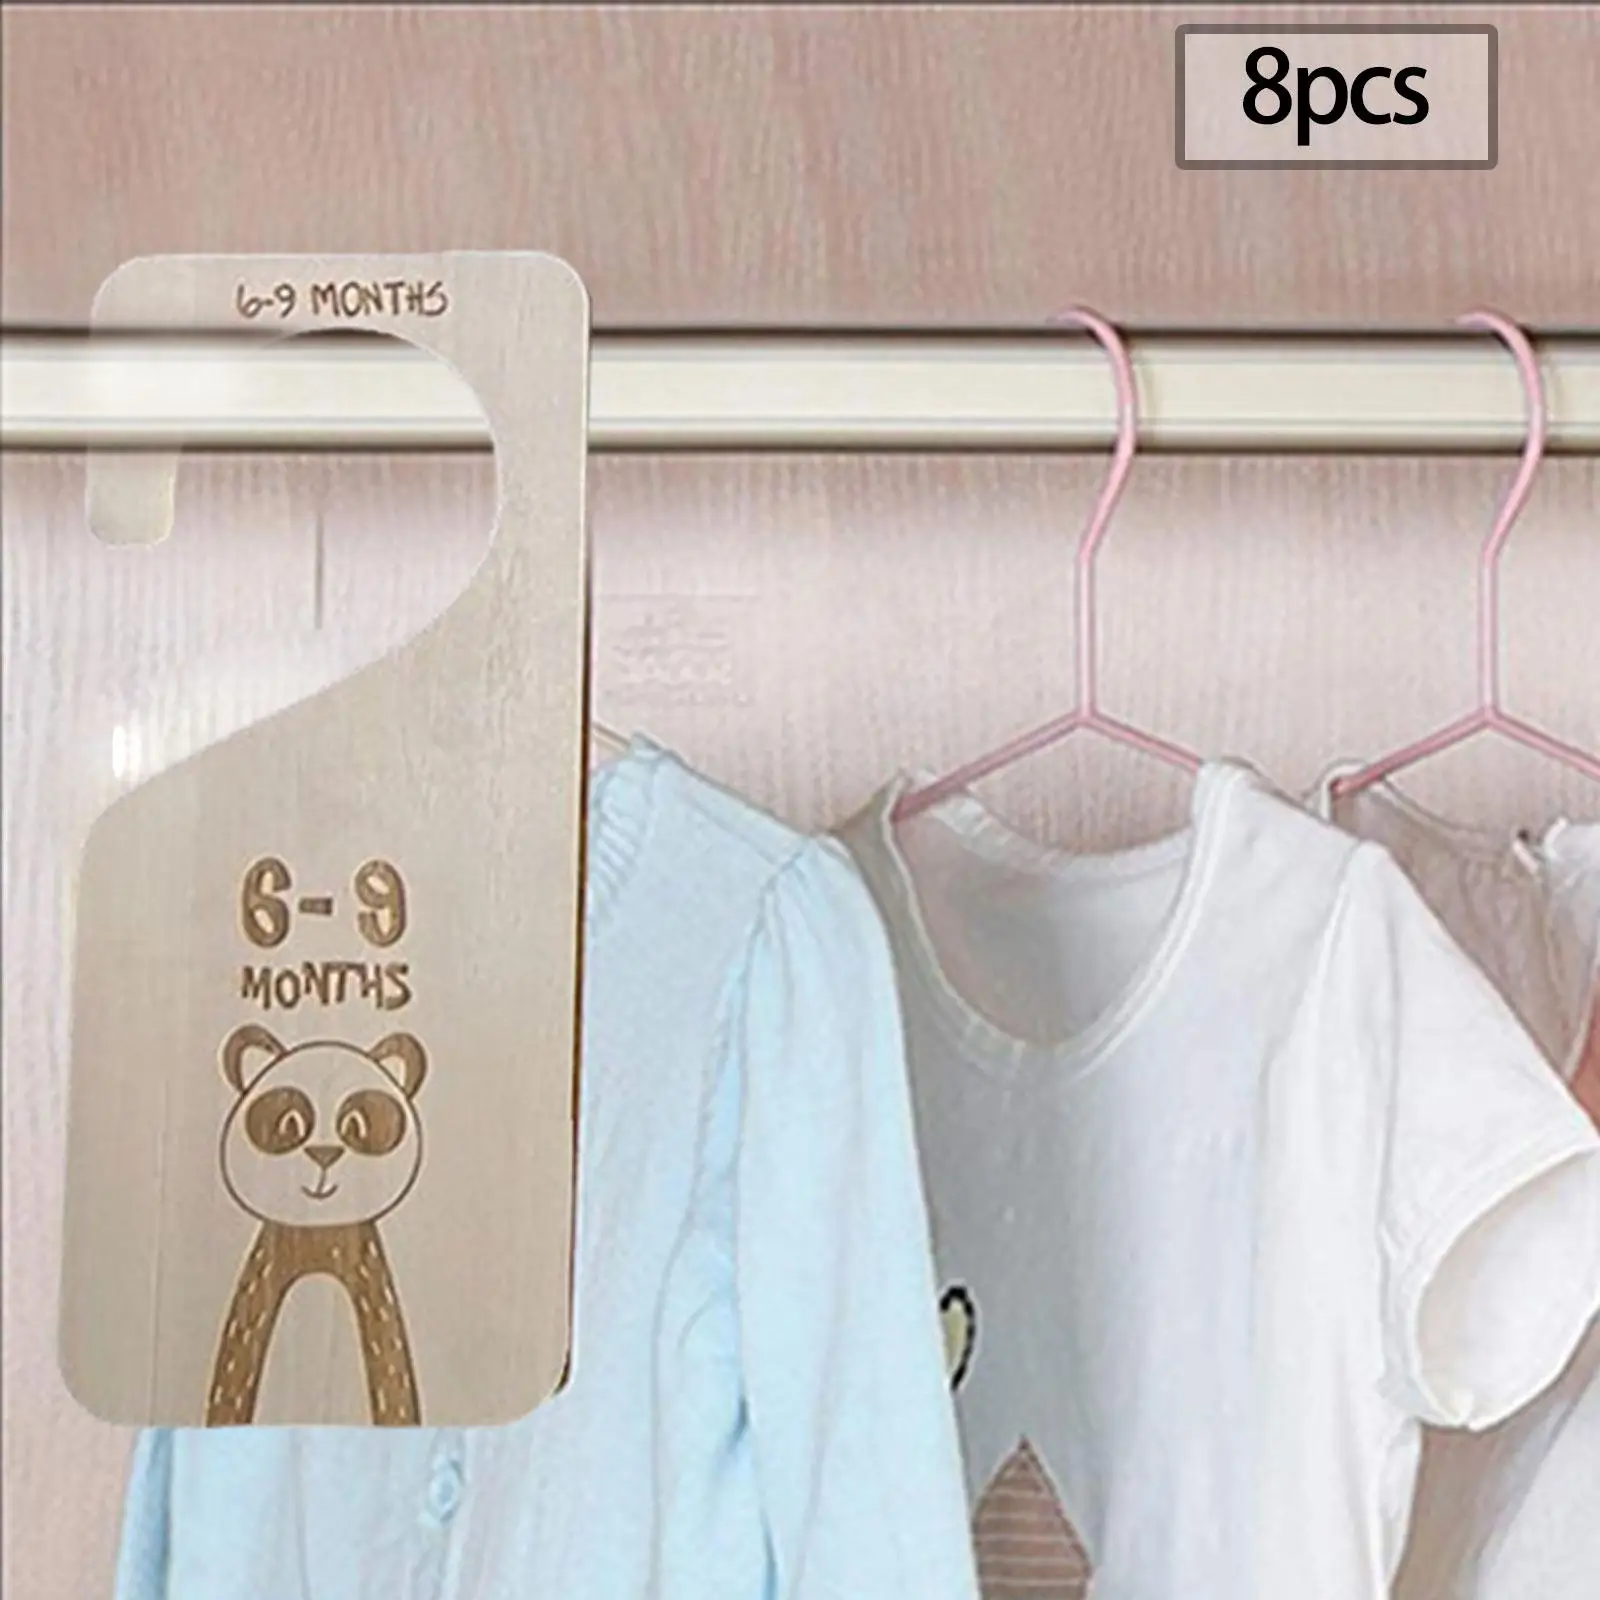 7 Pieces Newborn Closet Dividers Nursery Clothes Organizers for Daily Use